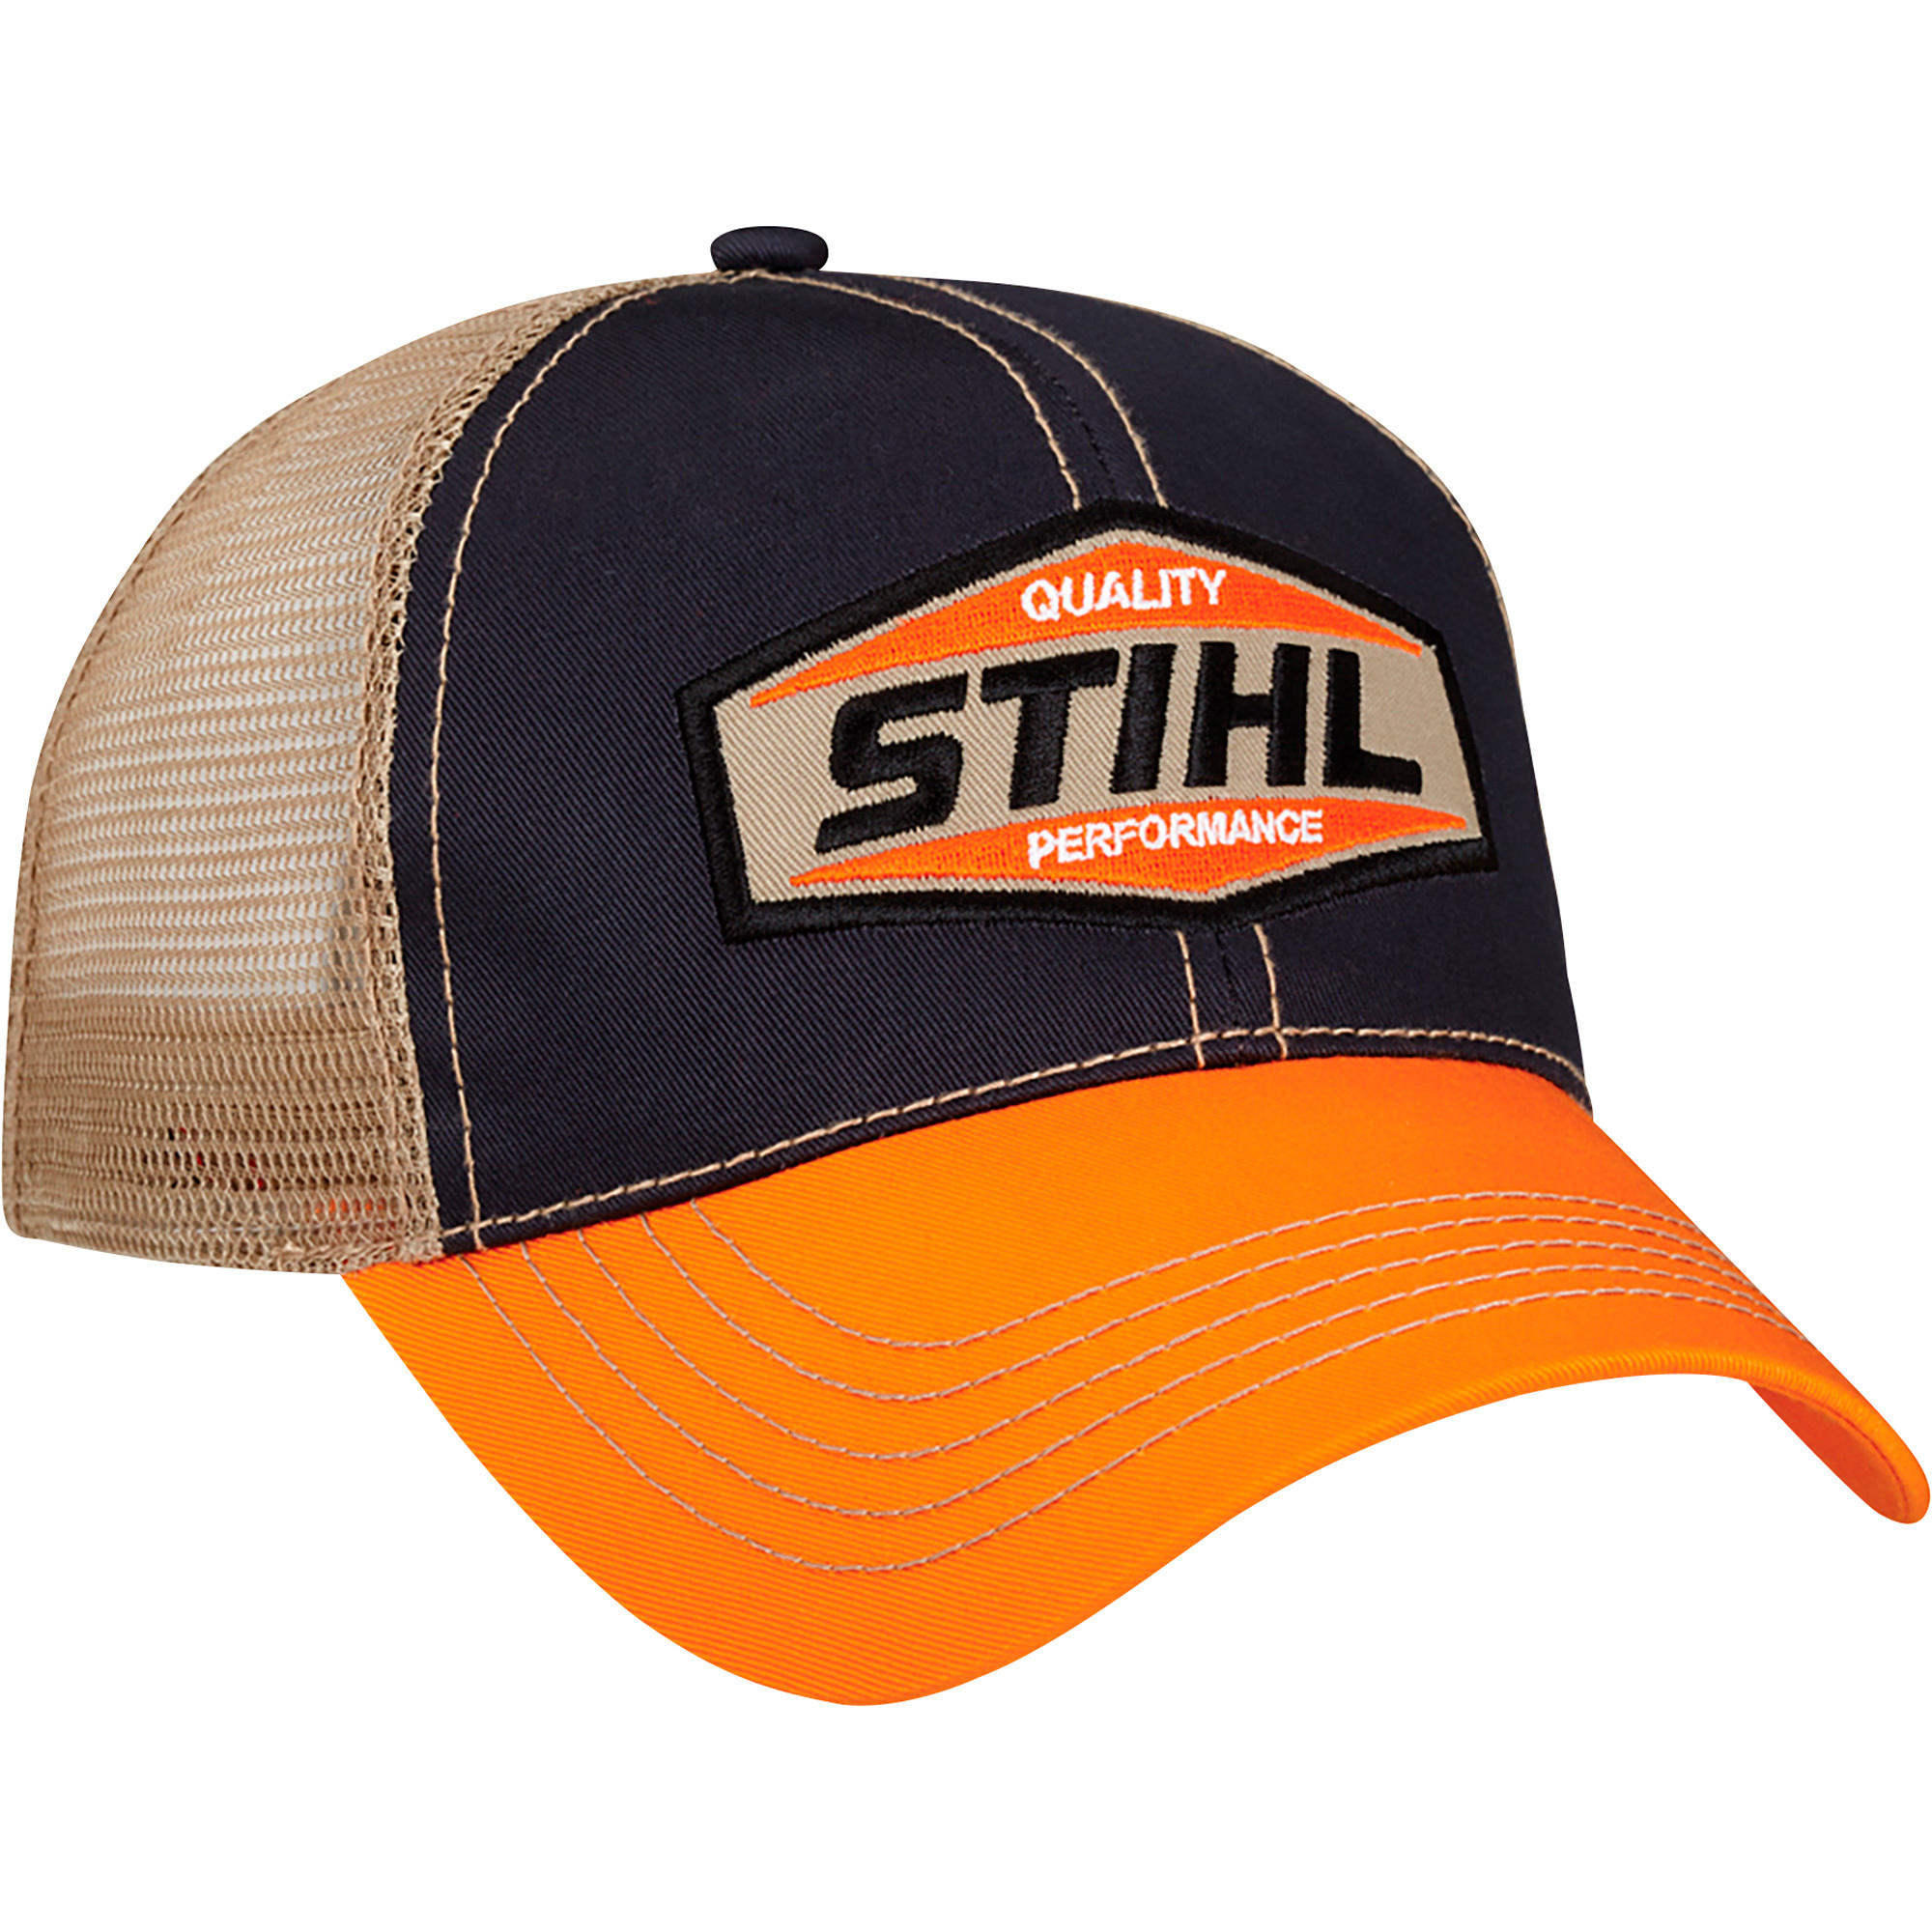 STIHL Outfitters Trademark Cap â Adjustable, Gray Mesh Back